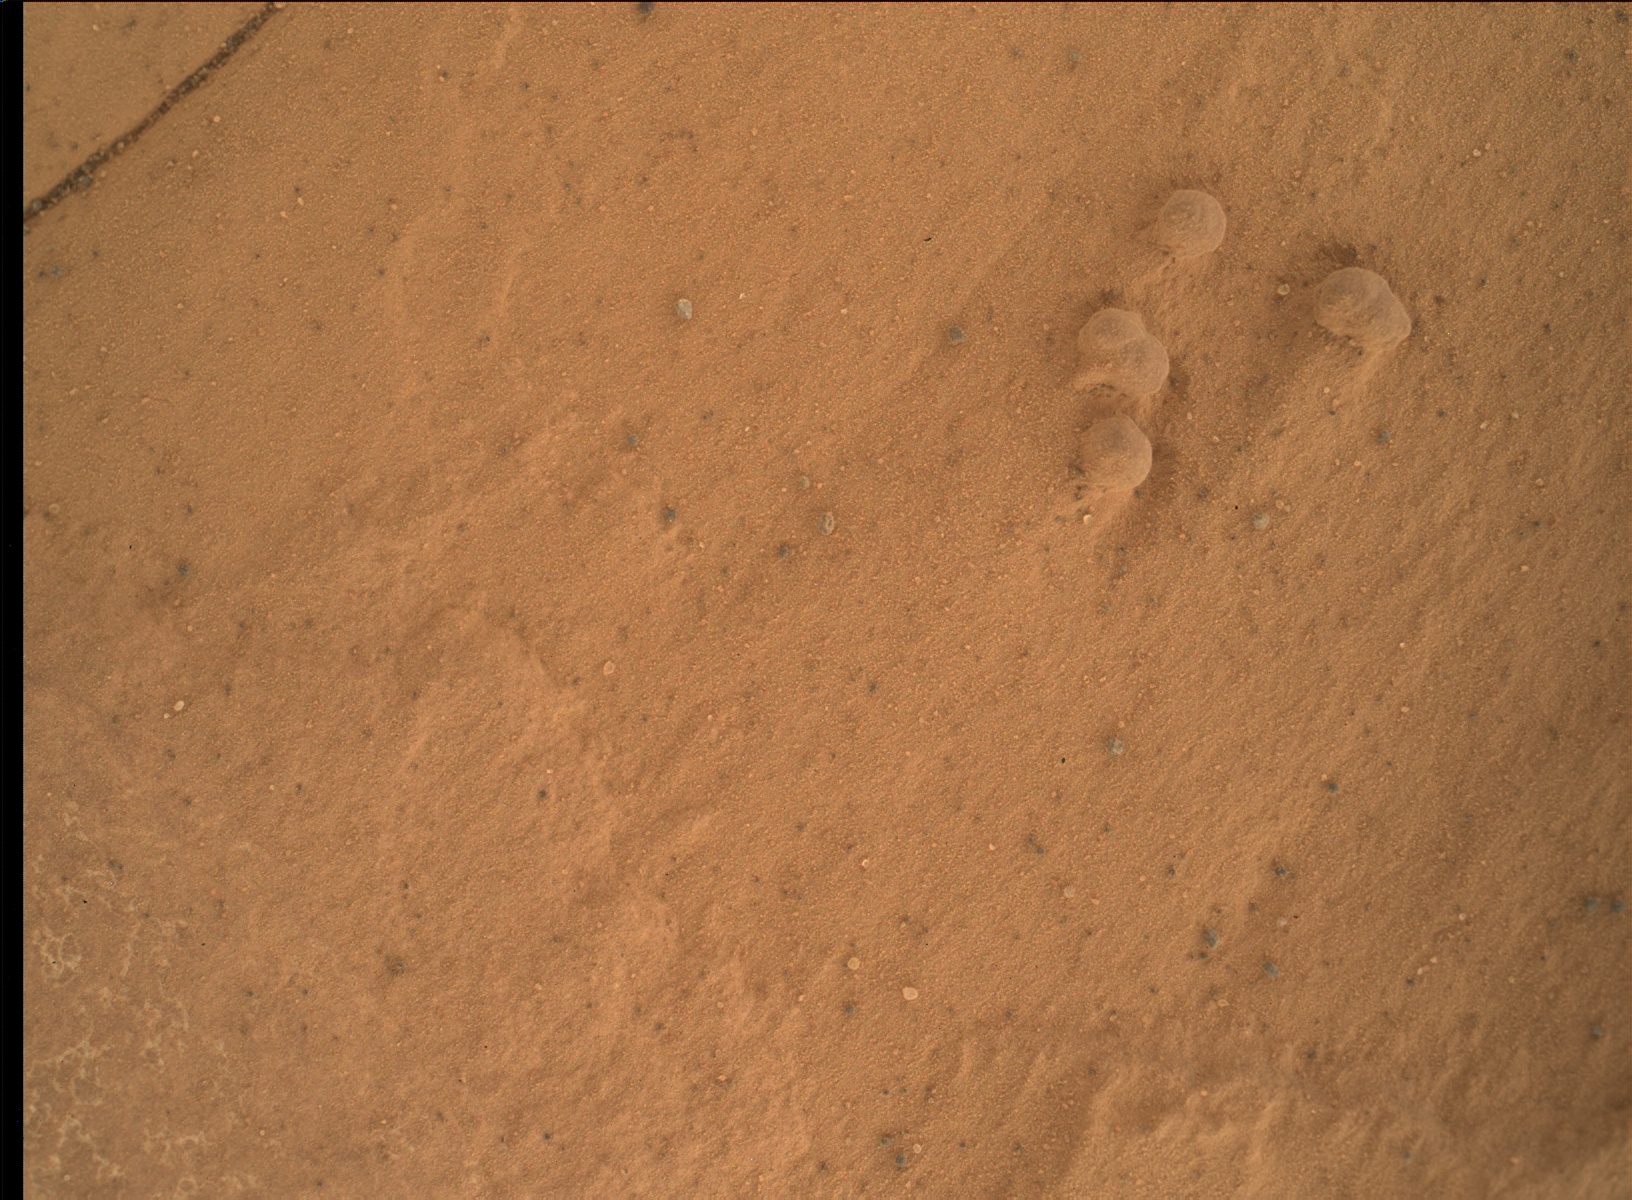 Nasa's Mars rover Curiosity acquired this image using its Mars Hand Lens Imager (MAHLI) on Sol 1786